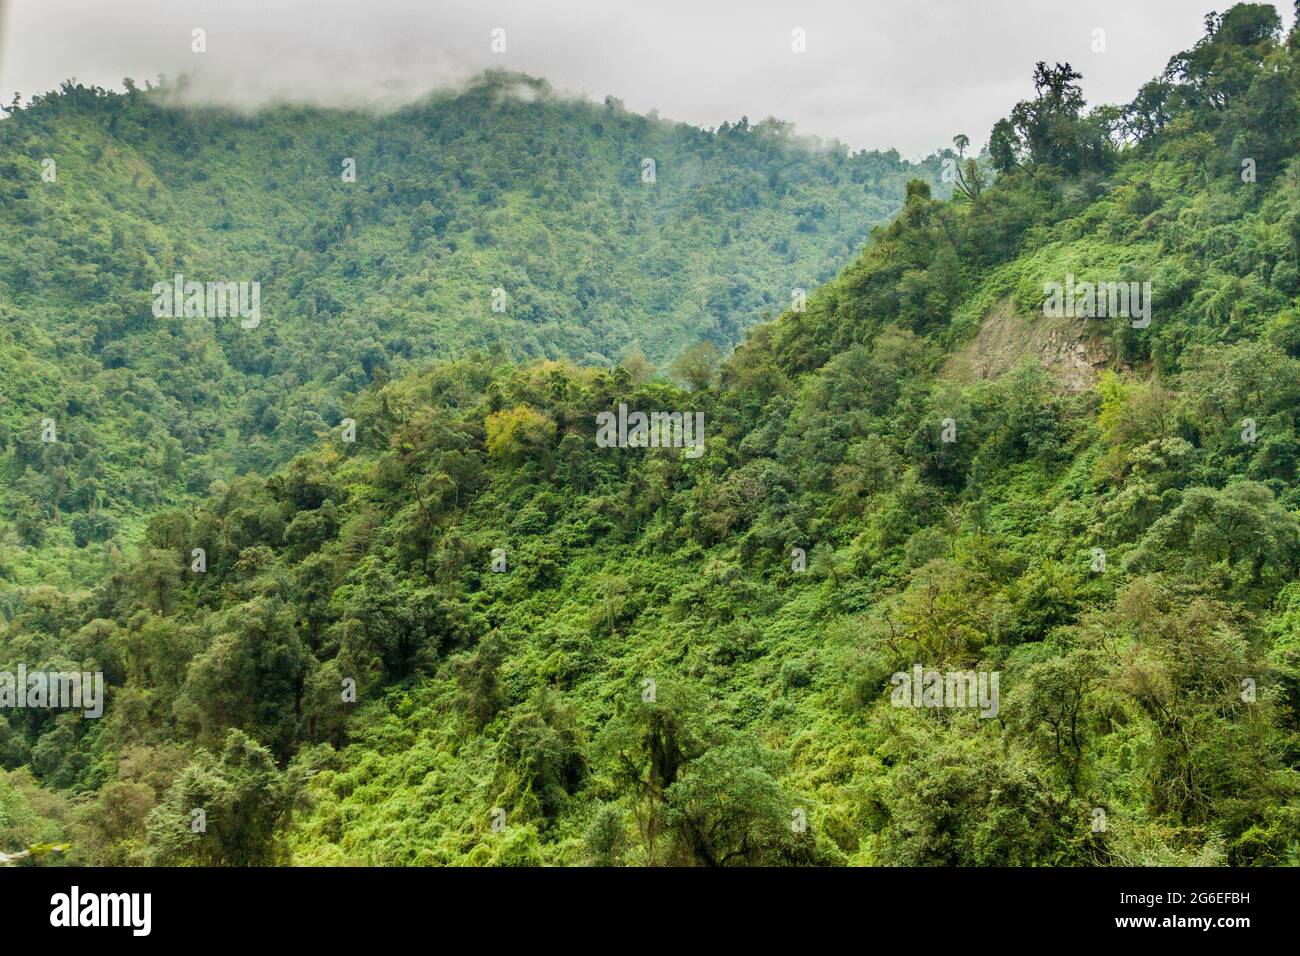 Mountains covered with a lush forest near San Miguel de Tucuman, Argentina Stock Photo